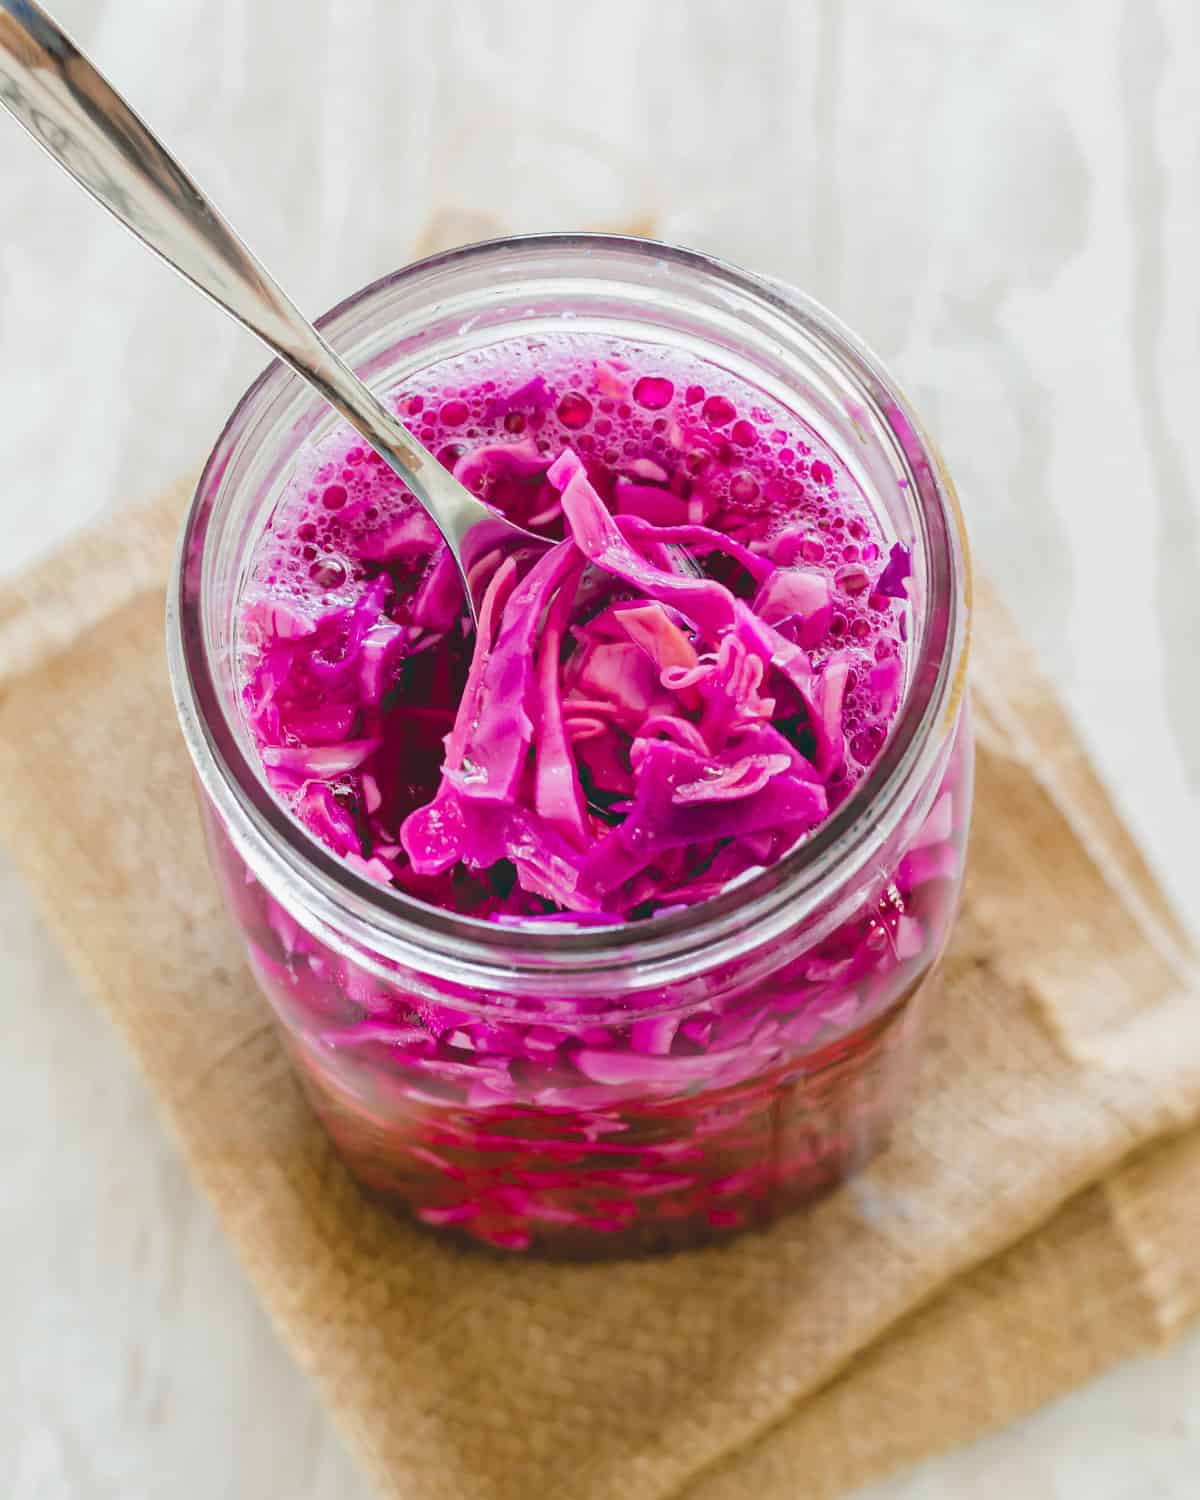 Fermented red cabbage sauerkraut in a mason jar with a spoon.